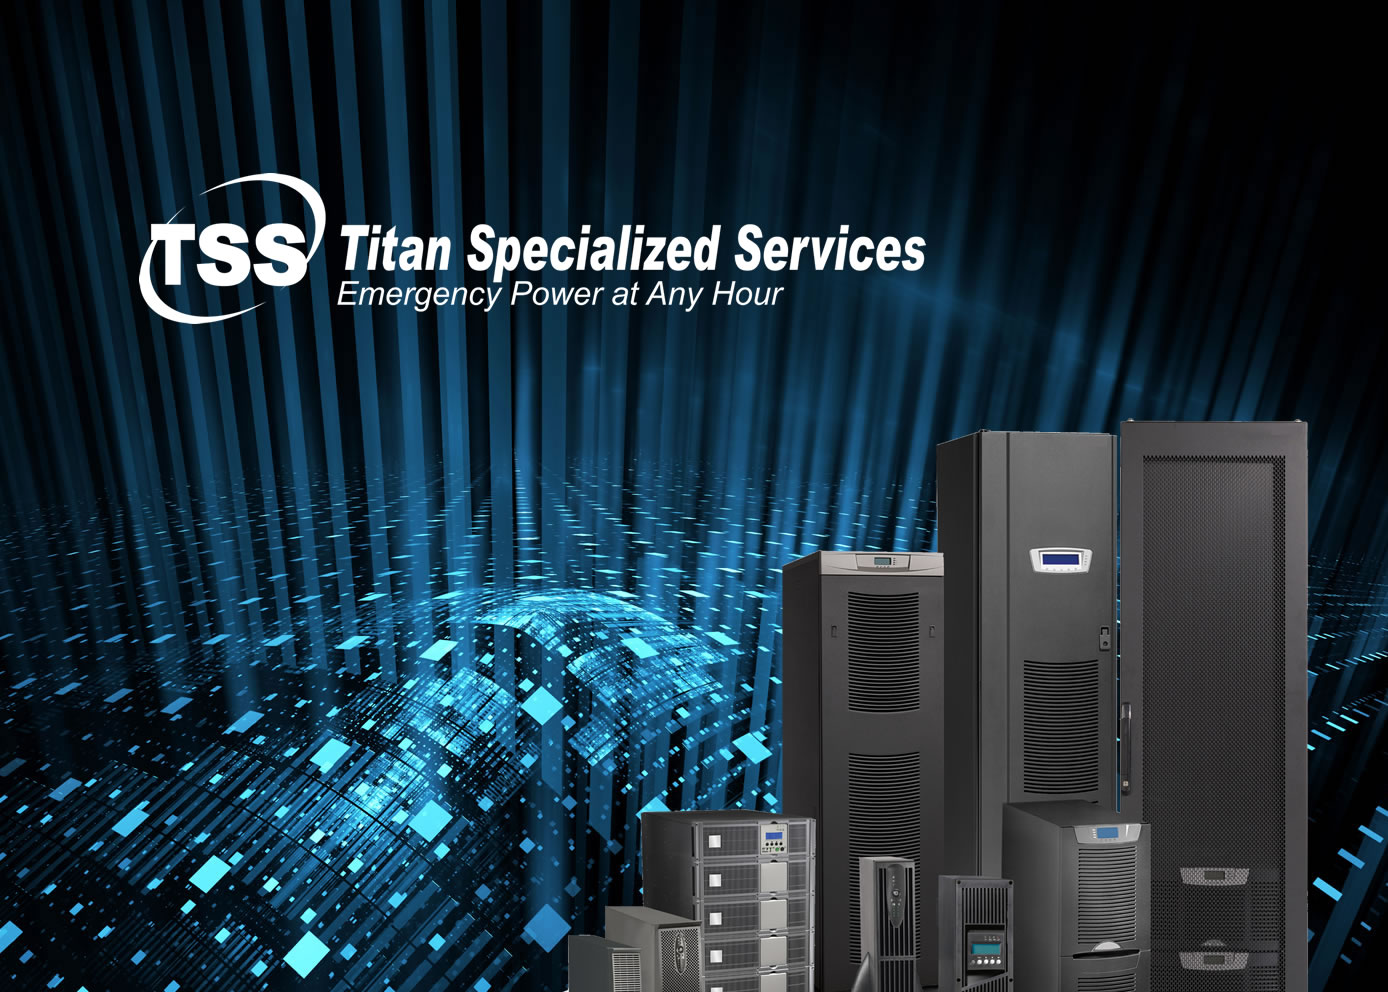 titan-specialized-services-ups-power-backup-commercial-systems